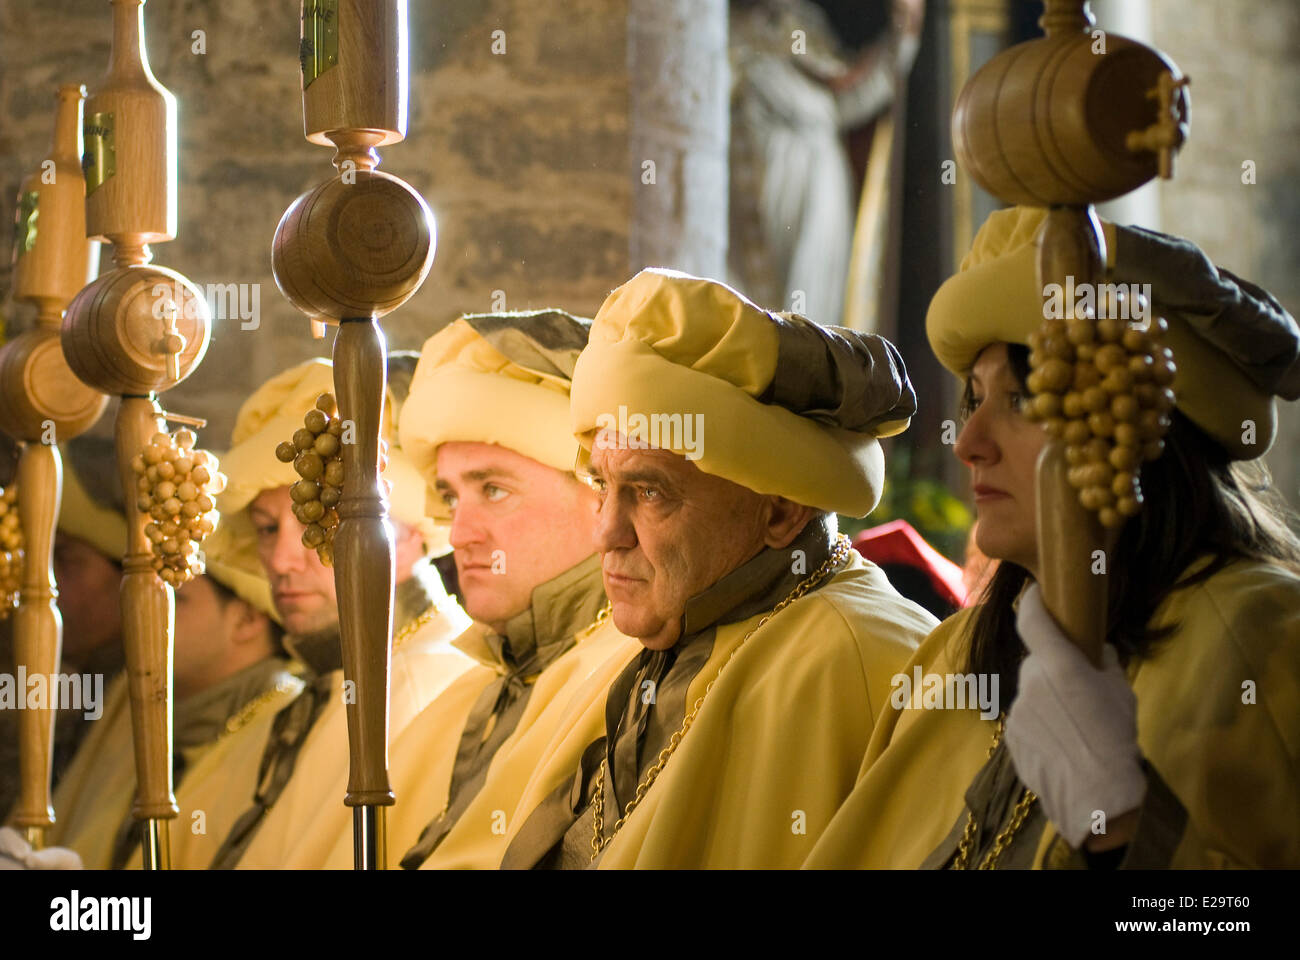 France, Jura, Arbois, breakthrough of the yellow wine, mass in the church Saint Just, ambassadors of the yellow wine Stock Photo